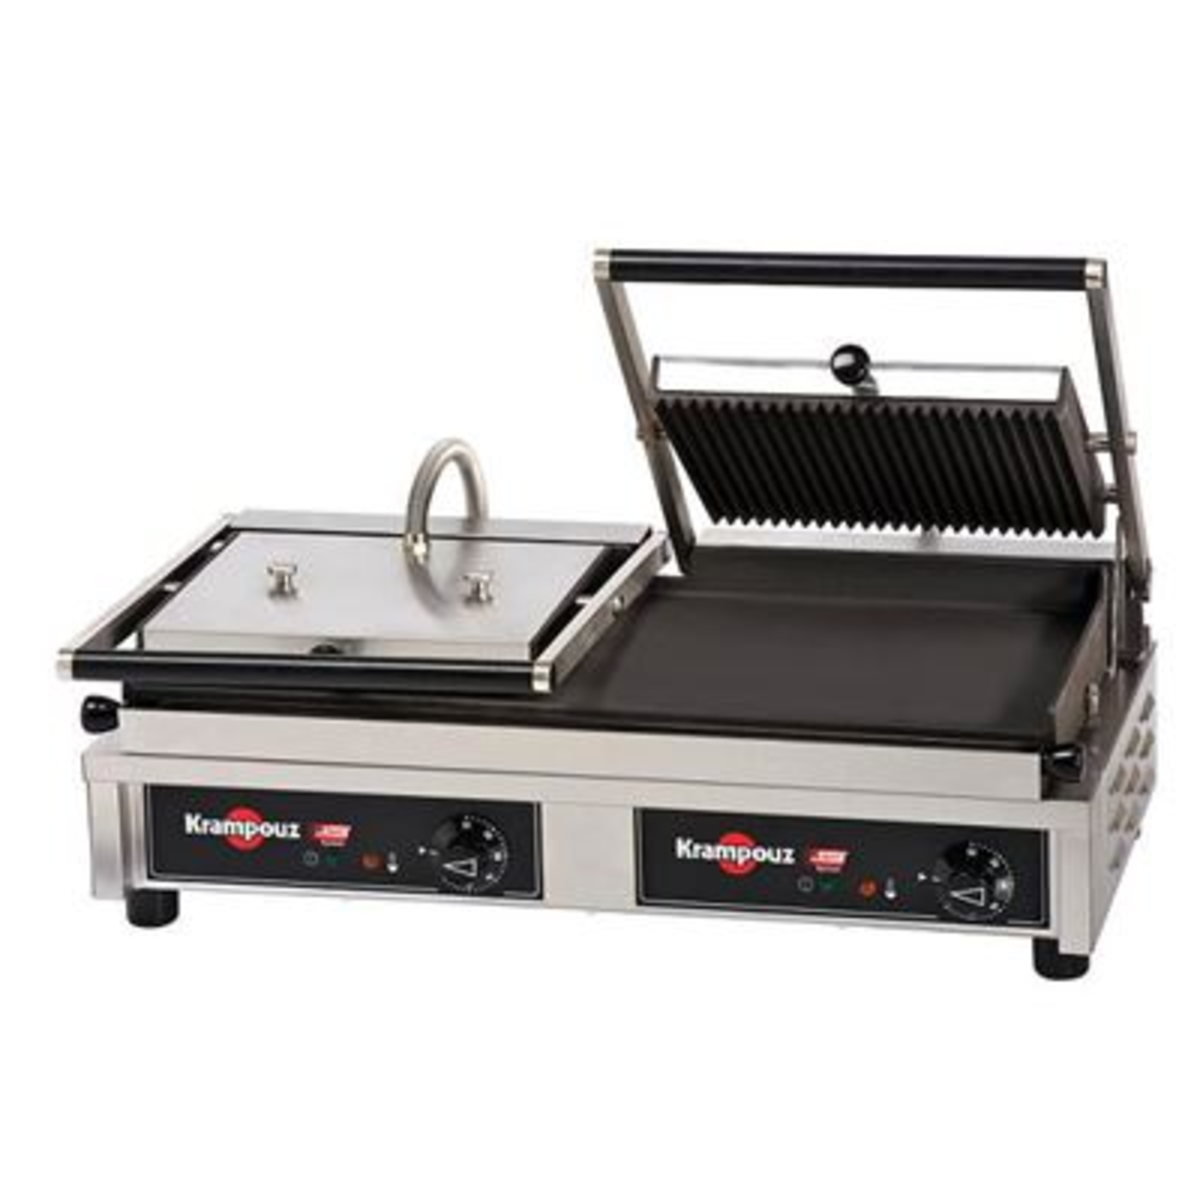 Multi contact grill large plaques striÃ©e / lisse